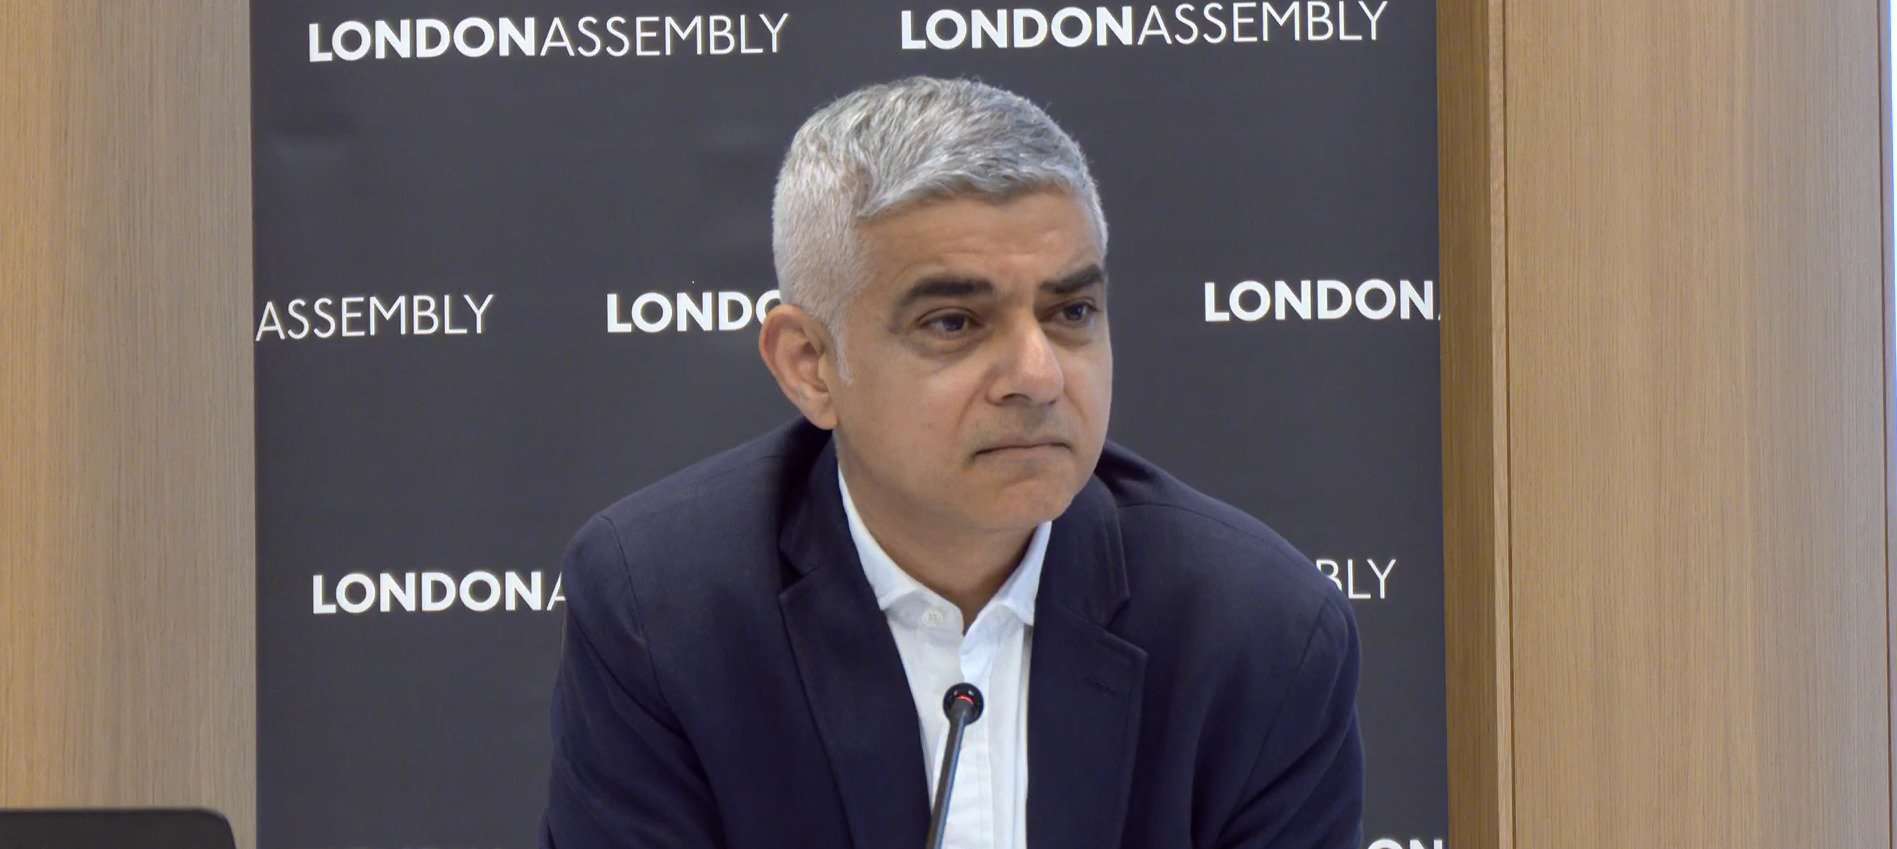 Sadiq Khan has been criticised by statistics watchdog over claims he has made about his affordable house-building record